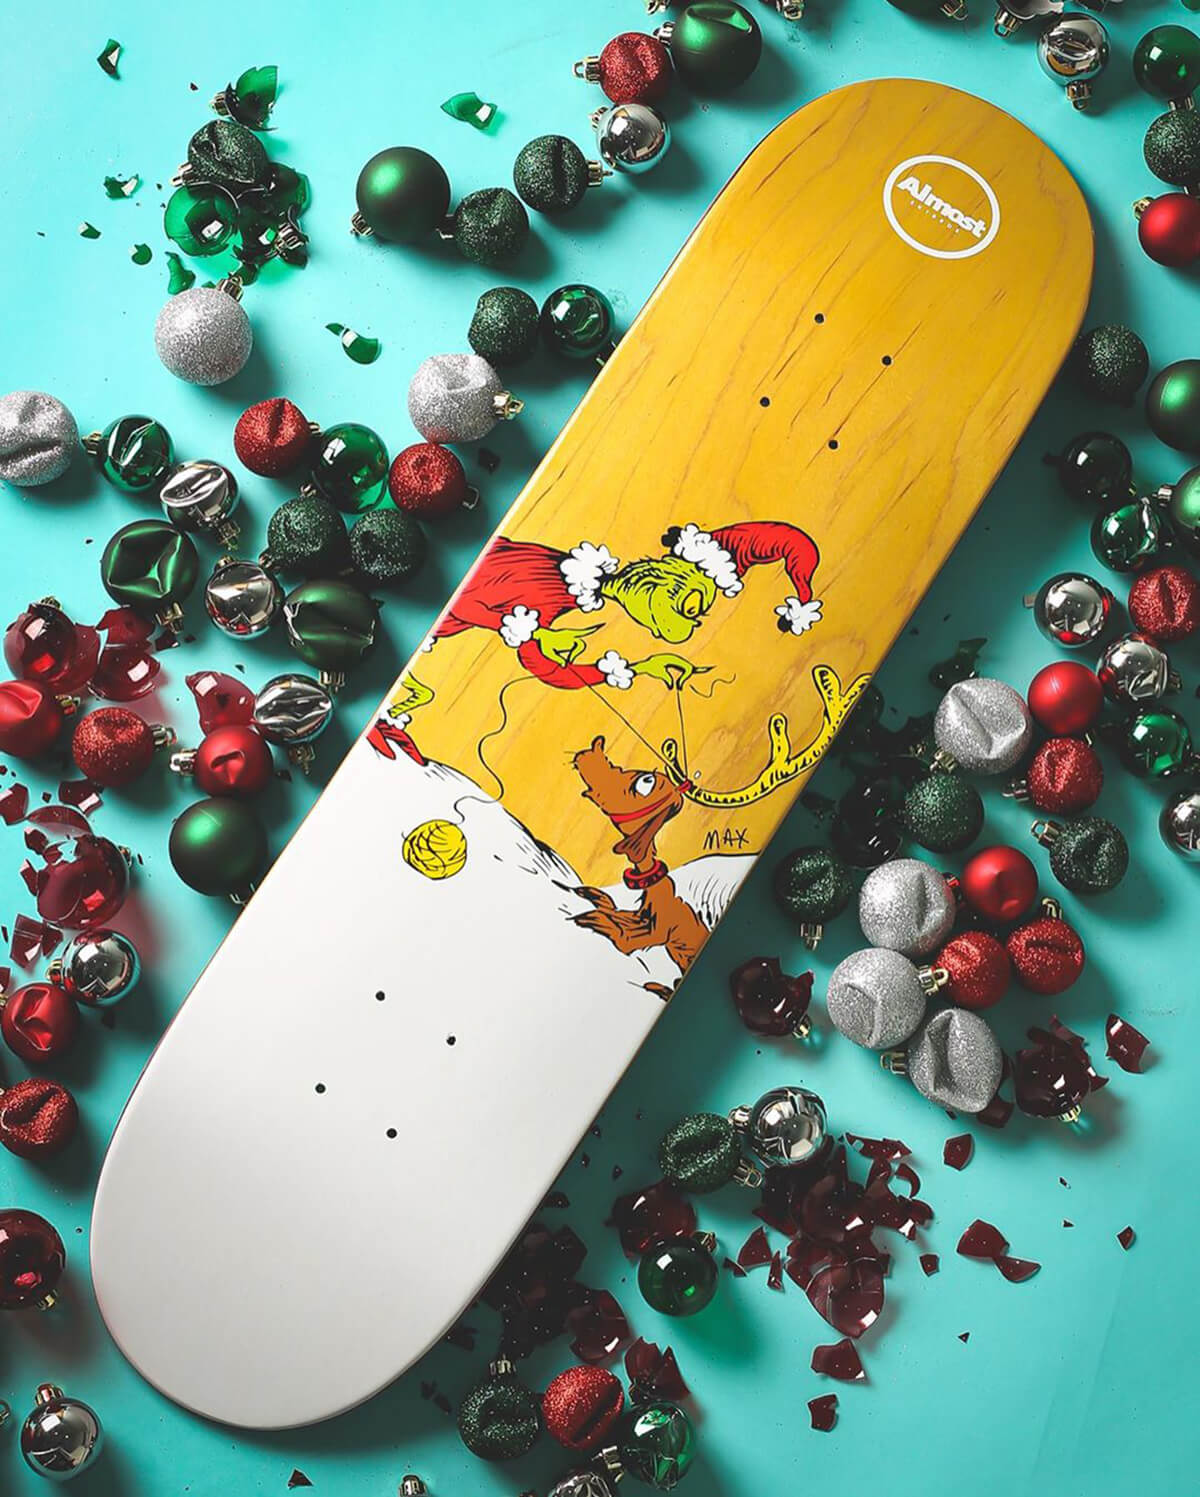 NEW ARRIVAL SKATEBOARDS FOR THOST THAT RIDE - SHOP SKATEBOARDS